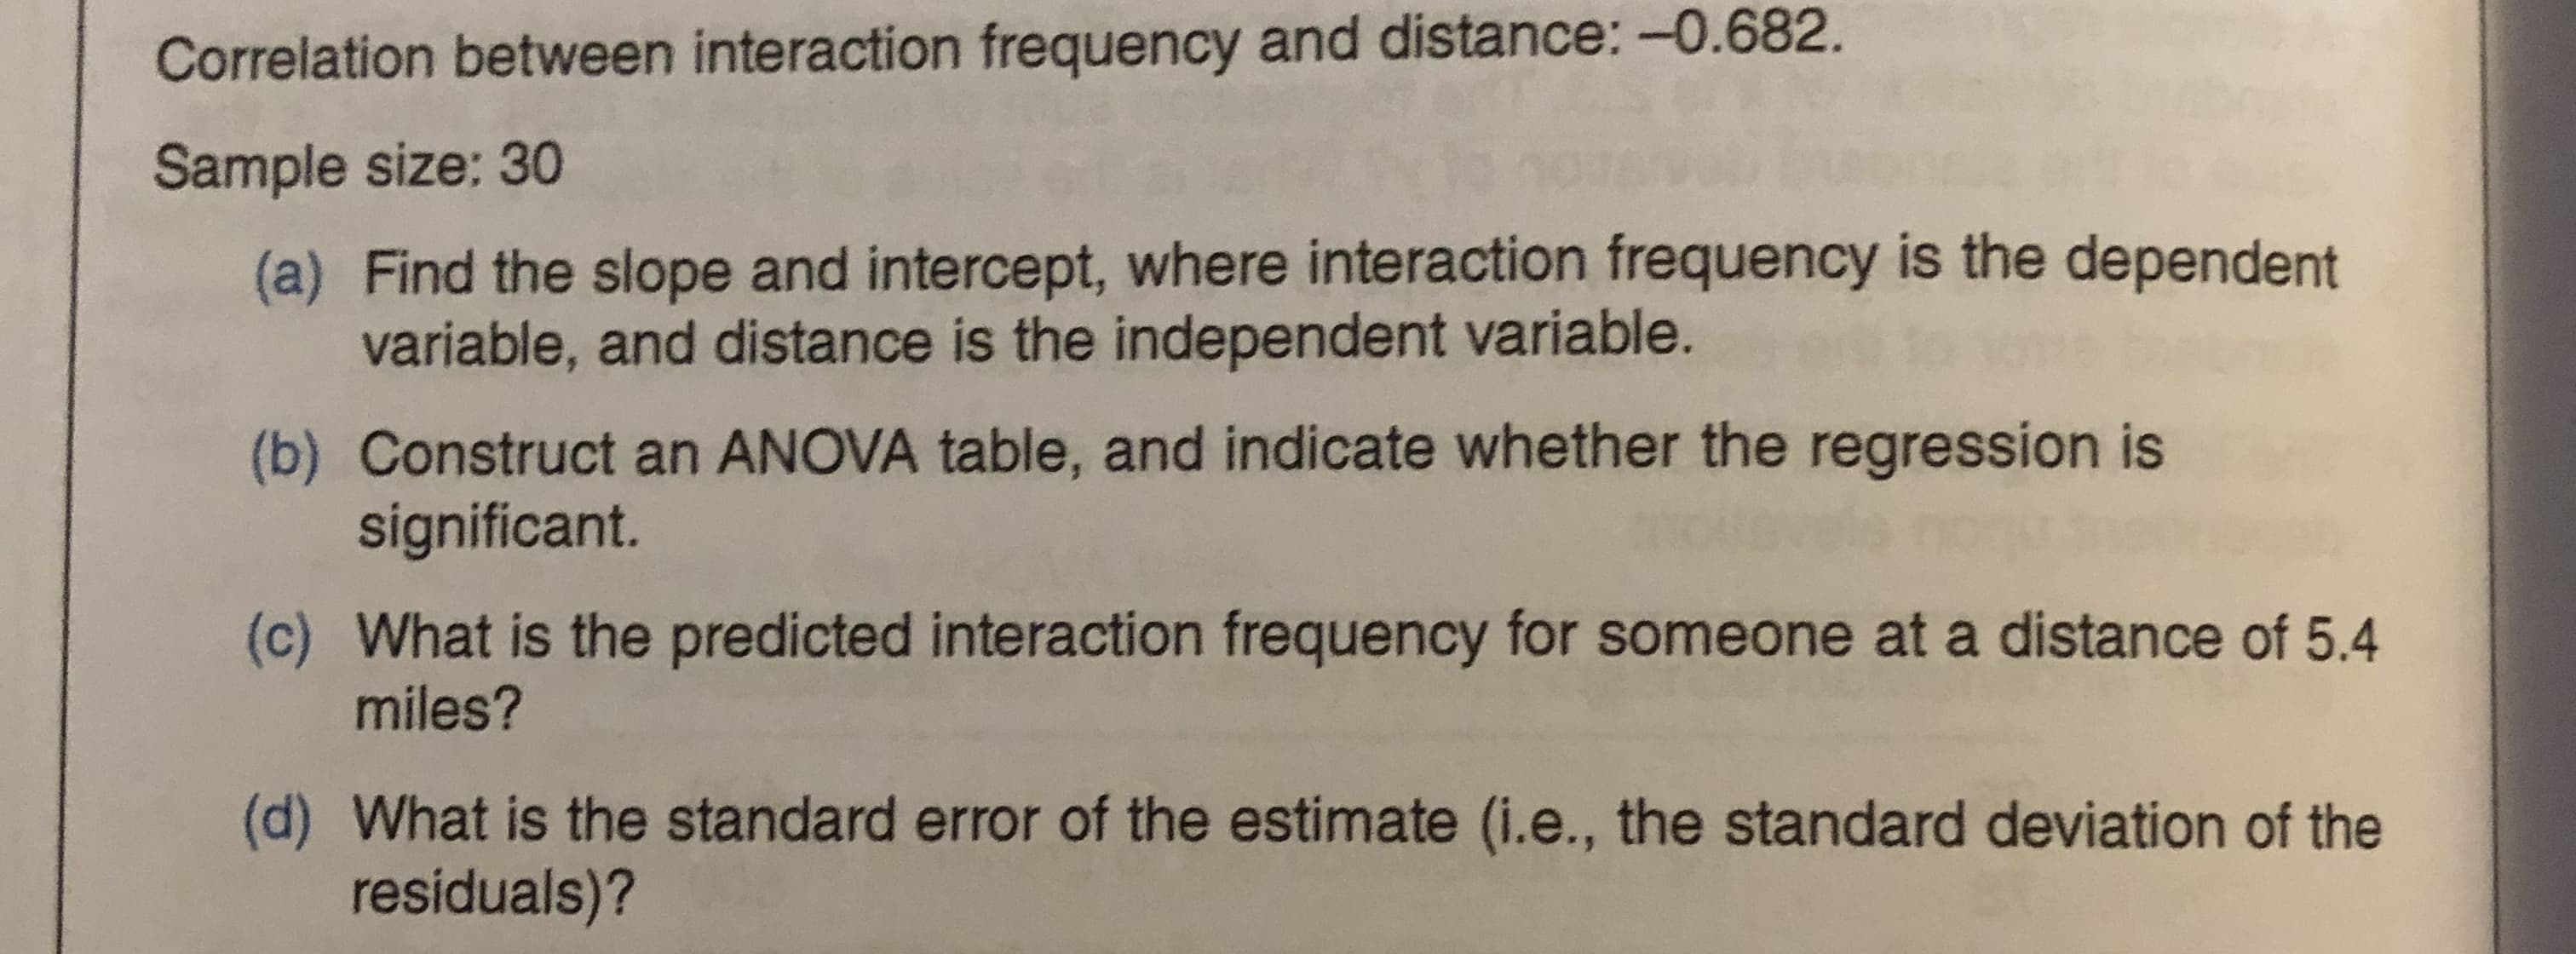 Correlation between interaction frequency and distance: -0.682.
Sample size: 30
(a) Find the slope and intercept, where interaction frequency is the dependent
variable, and distance is the independent variable.
(b) Construct an ANOVA table, and indicate whether the regression is
significant.
(c) What is the predicted interaction frequency for someone at a distance of 5.4
miles?
(d) What is the standard error of the estimate (i.e., the standard deviation of the
residuals)?
